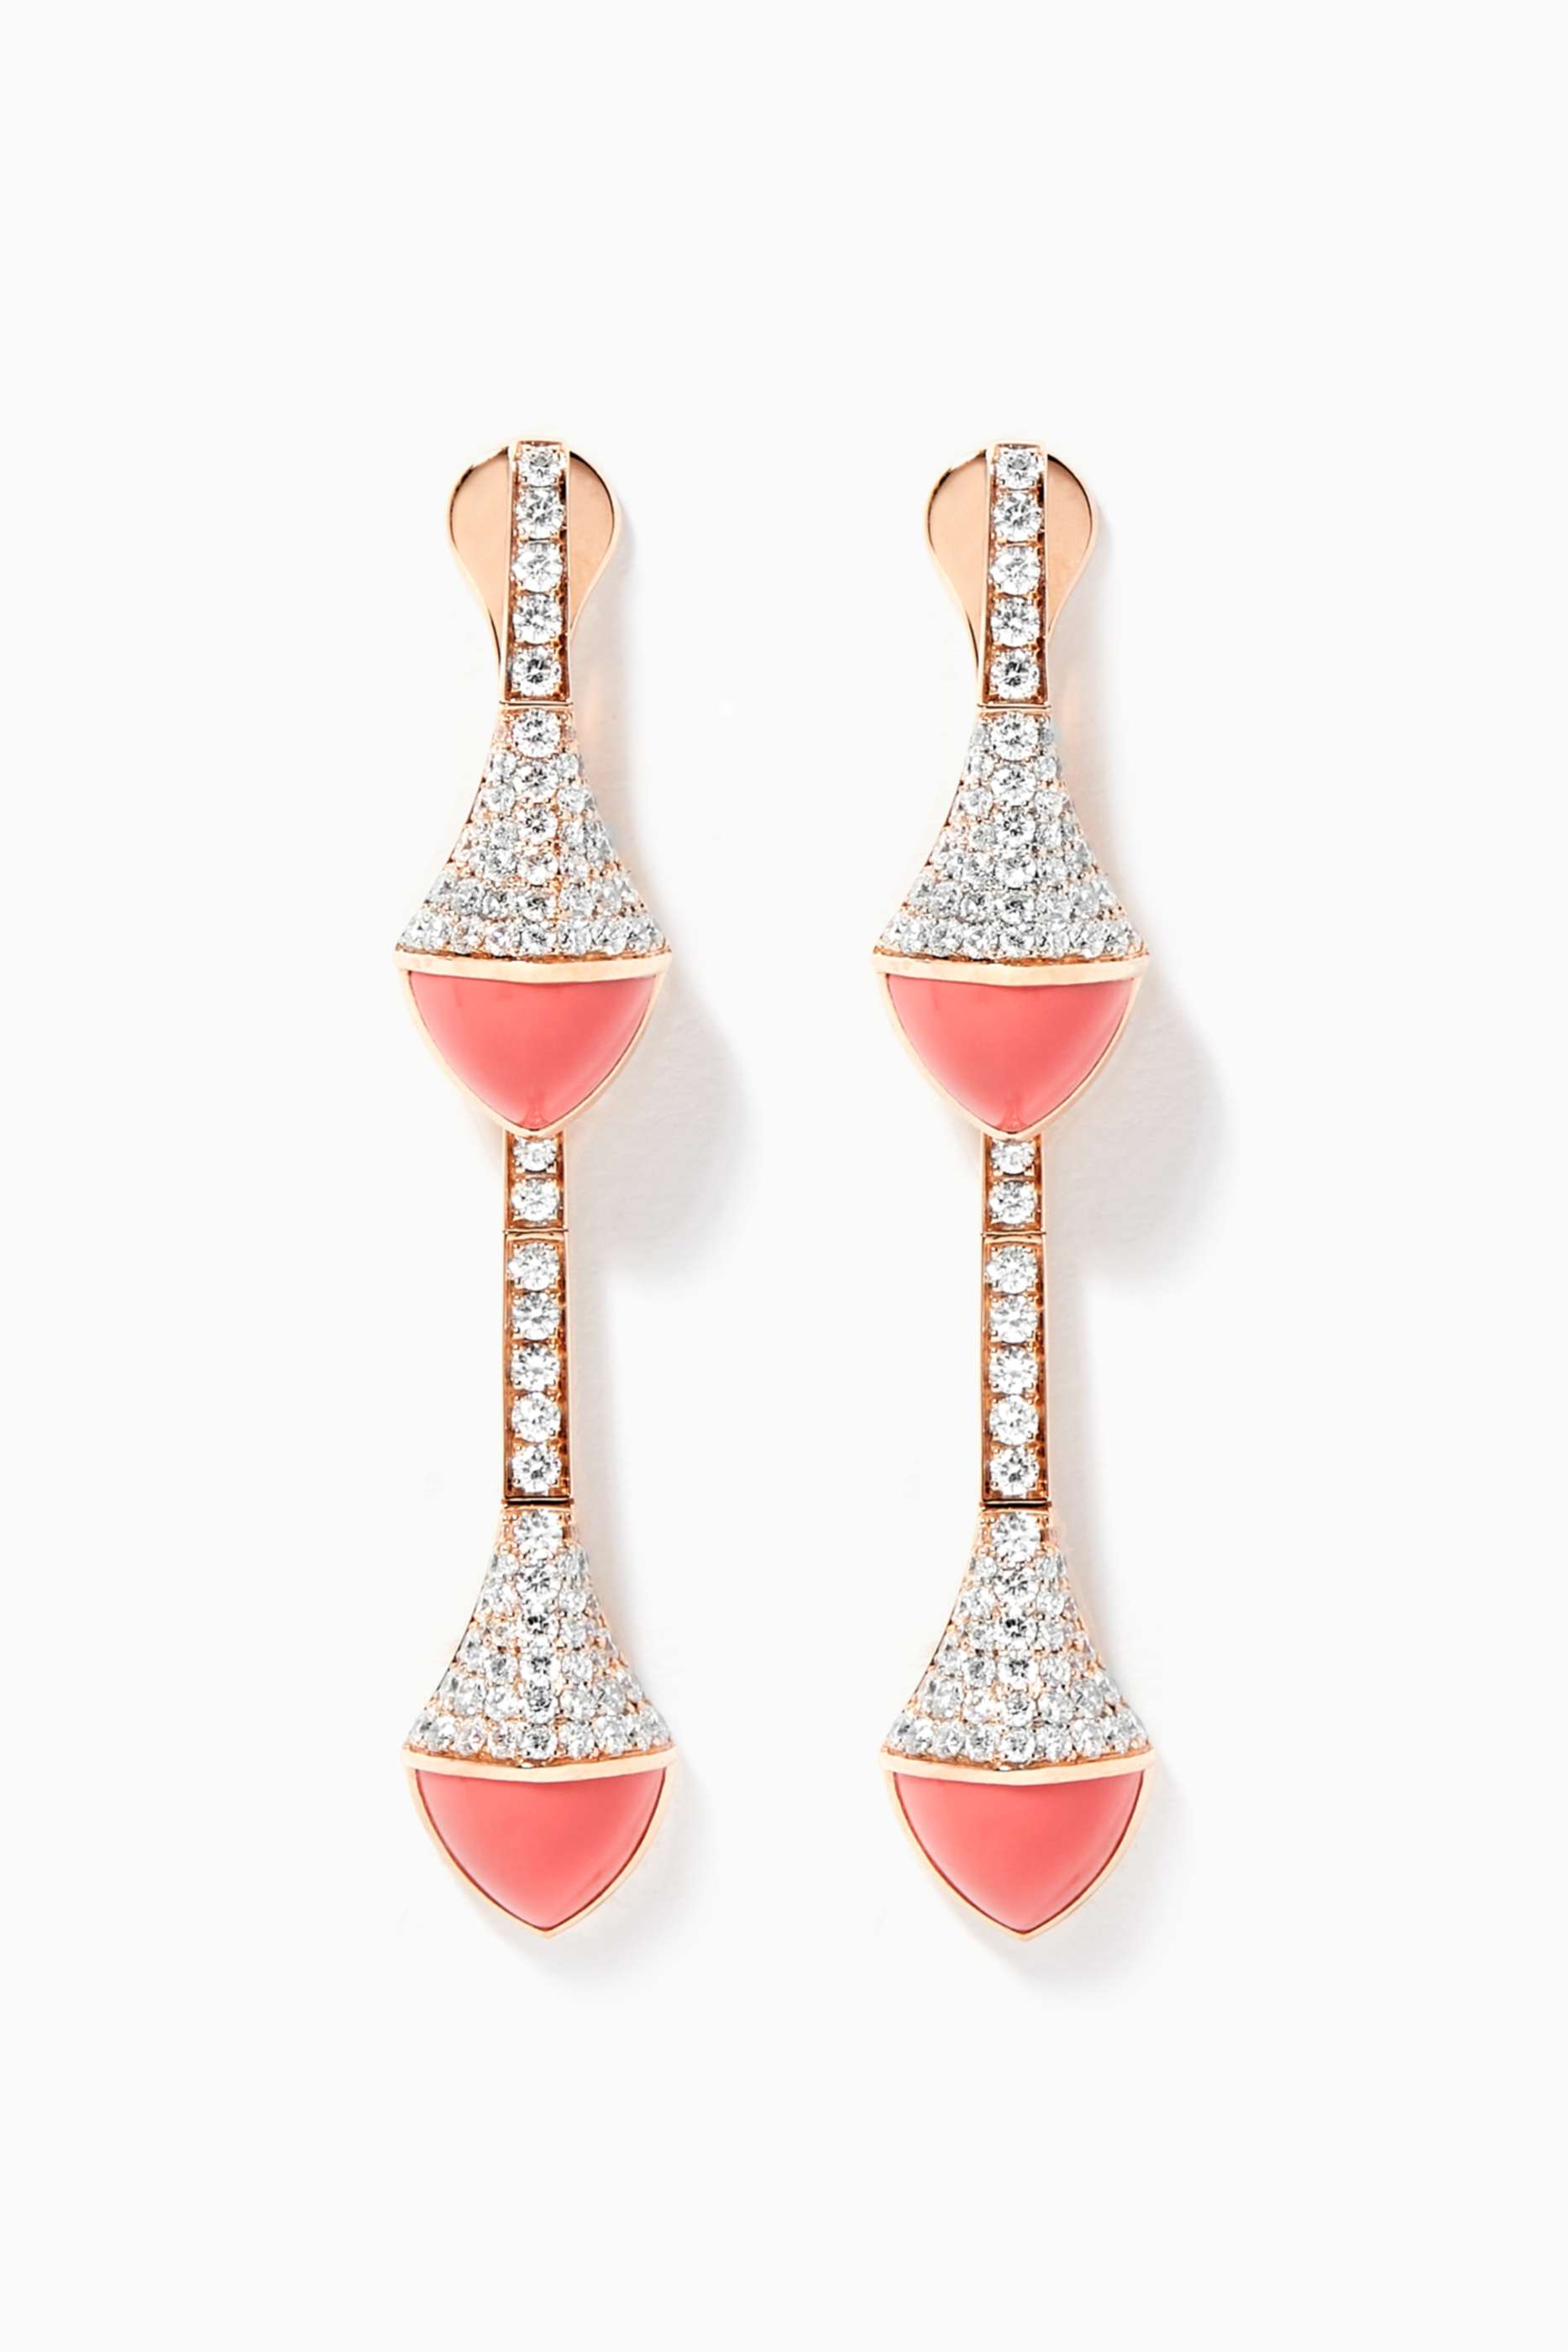 Shop Marli Rose Gold Cleo Diamond Drop Earrings with Pink Coral in 